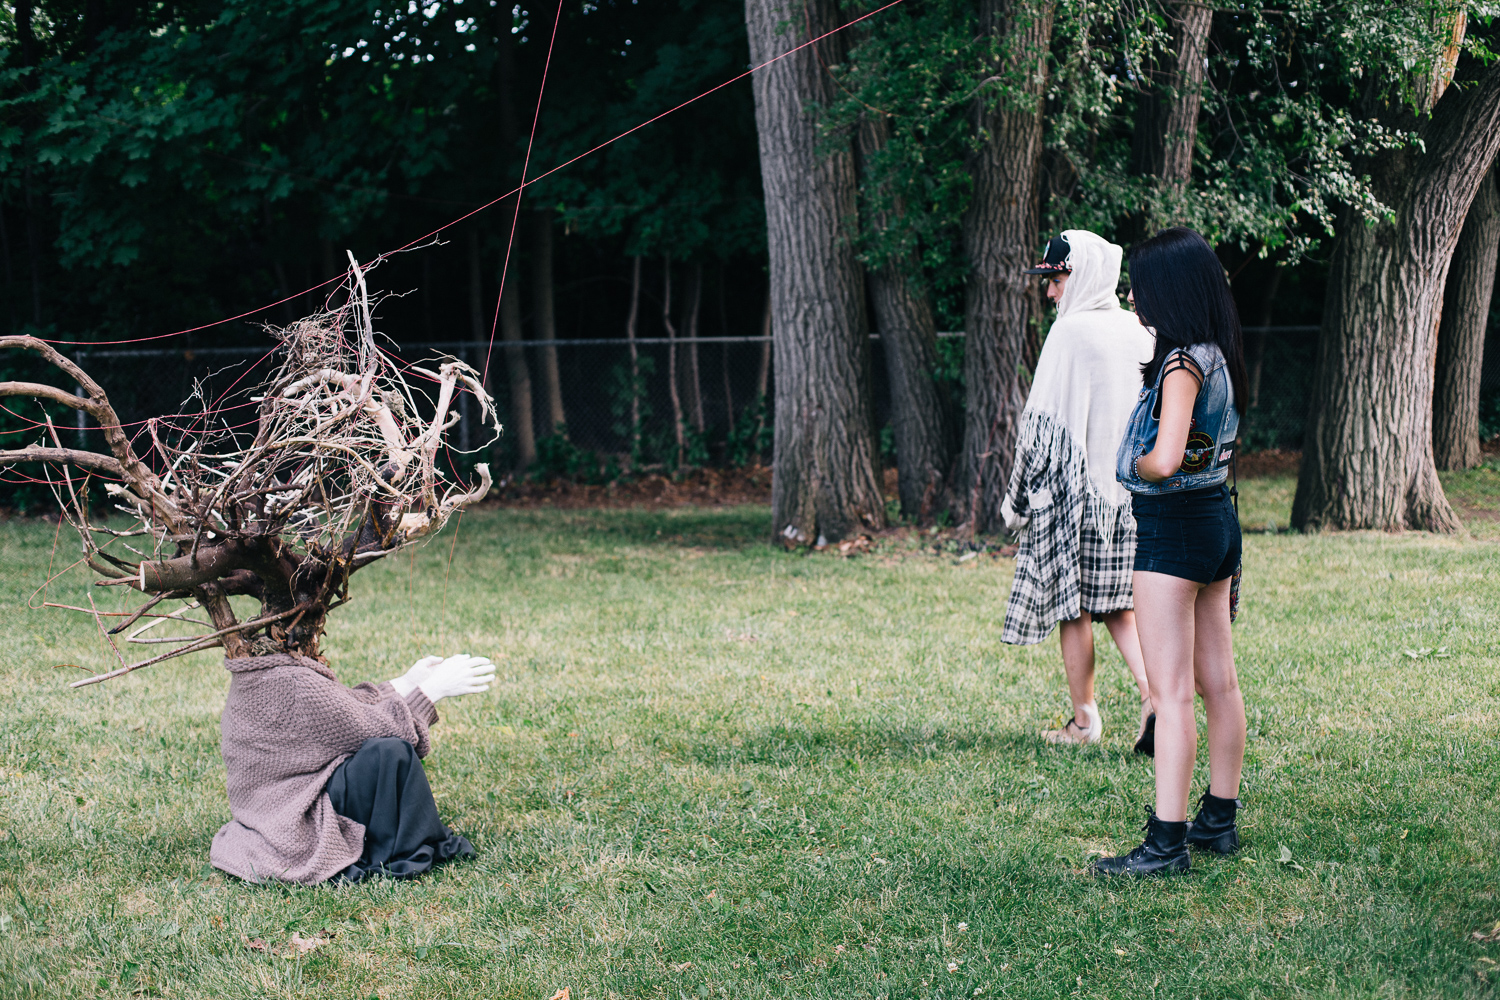 Two people stand and watch a seated person wearing a costume made of branches.